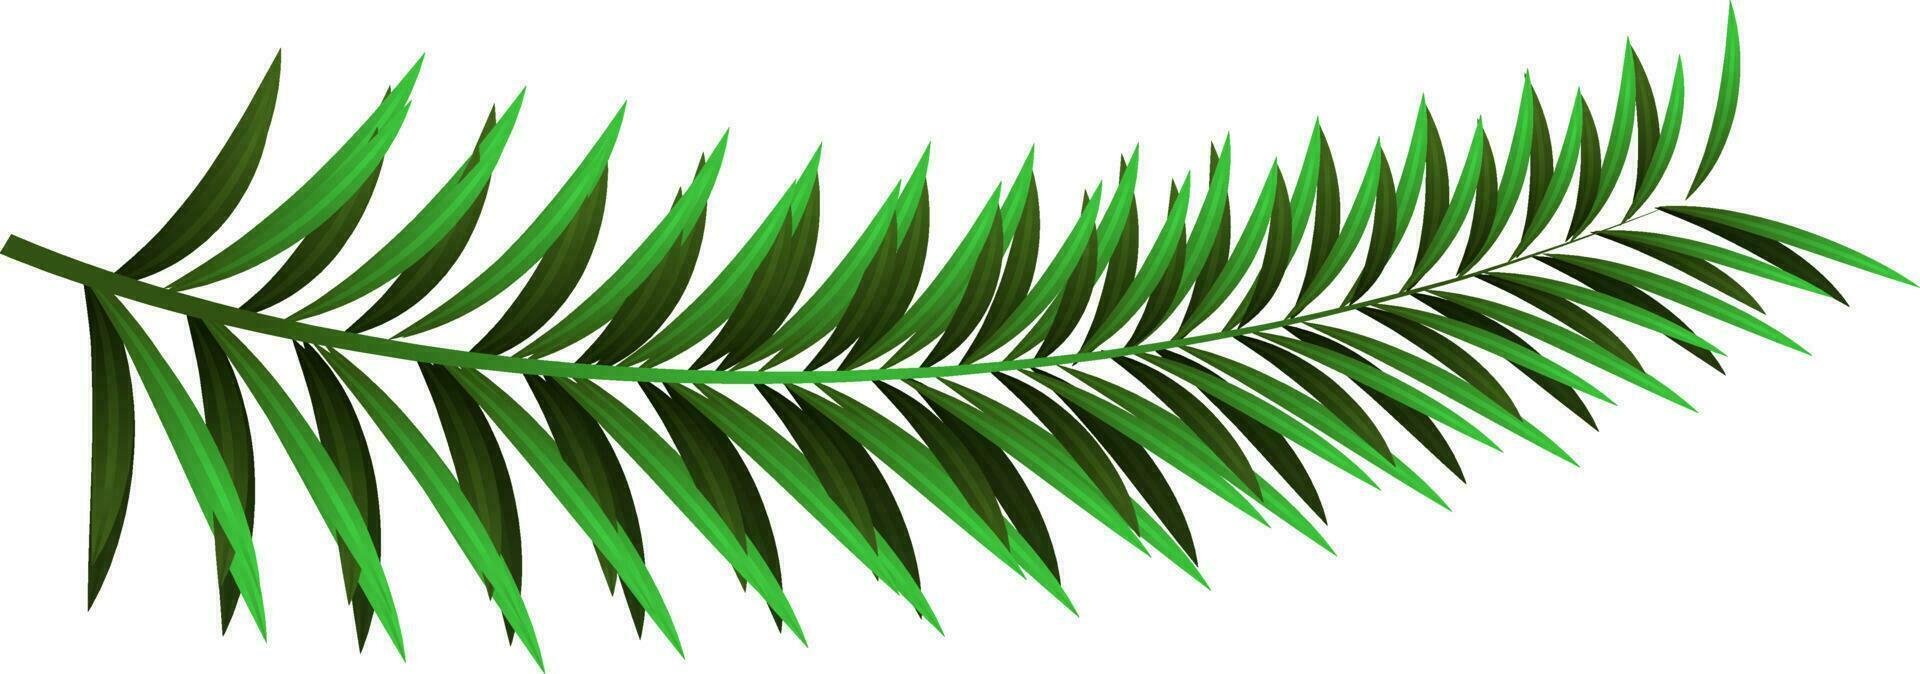 Realistic pine leaves on white background. vector